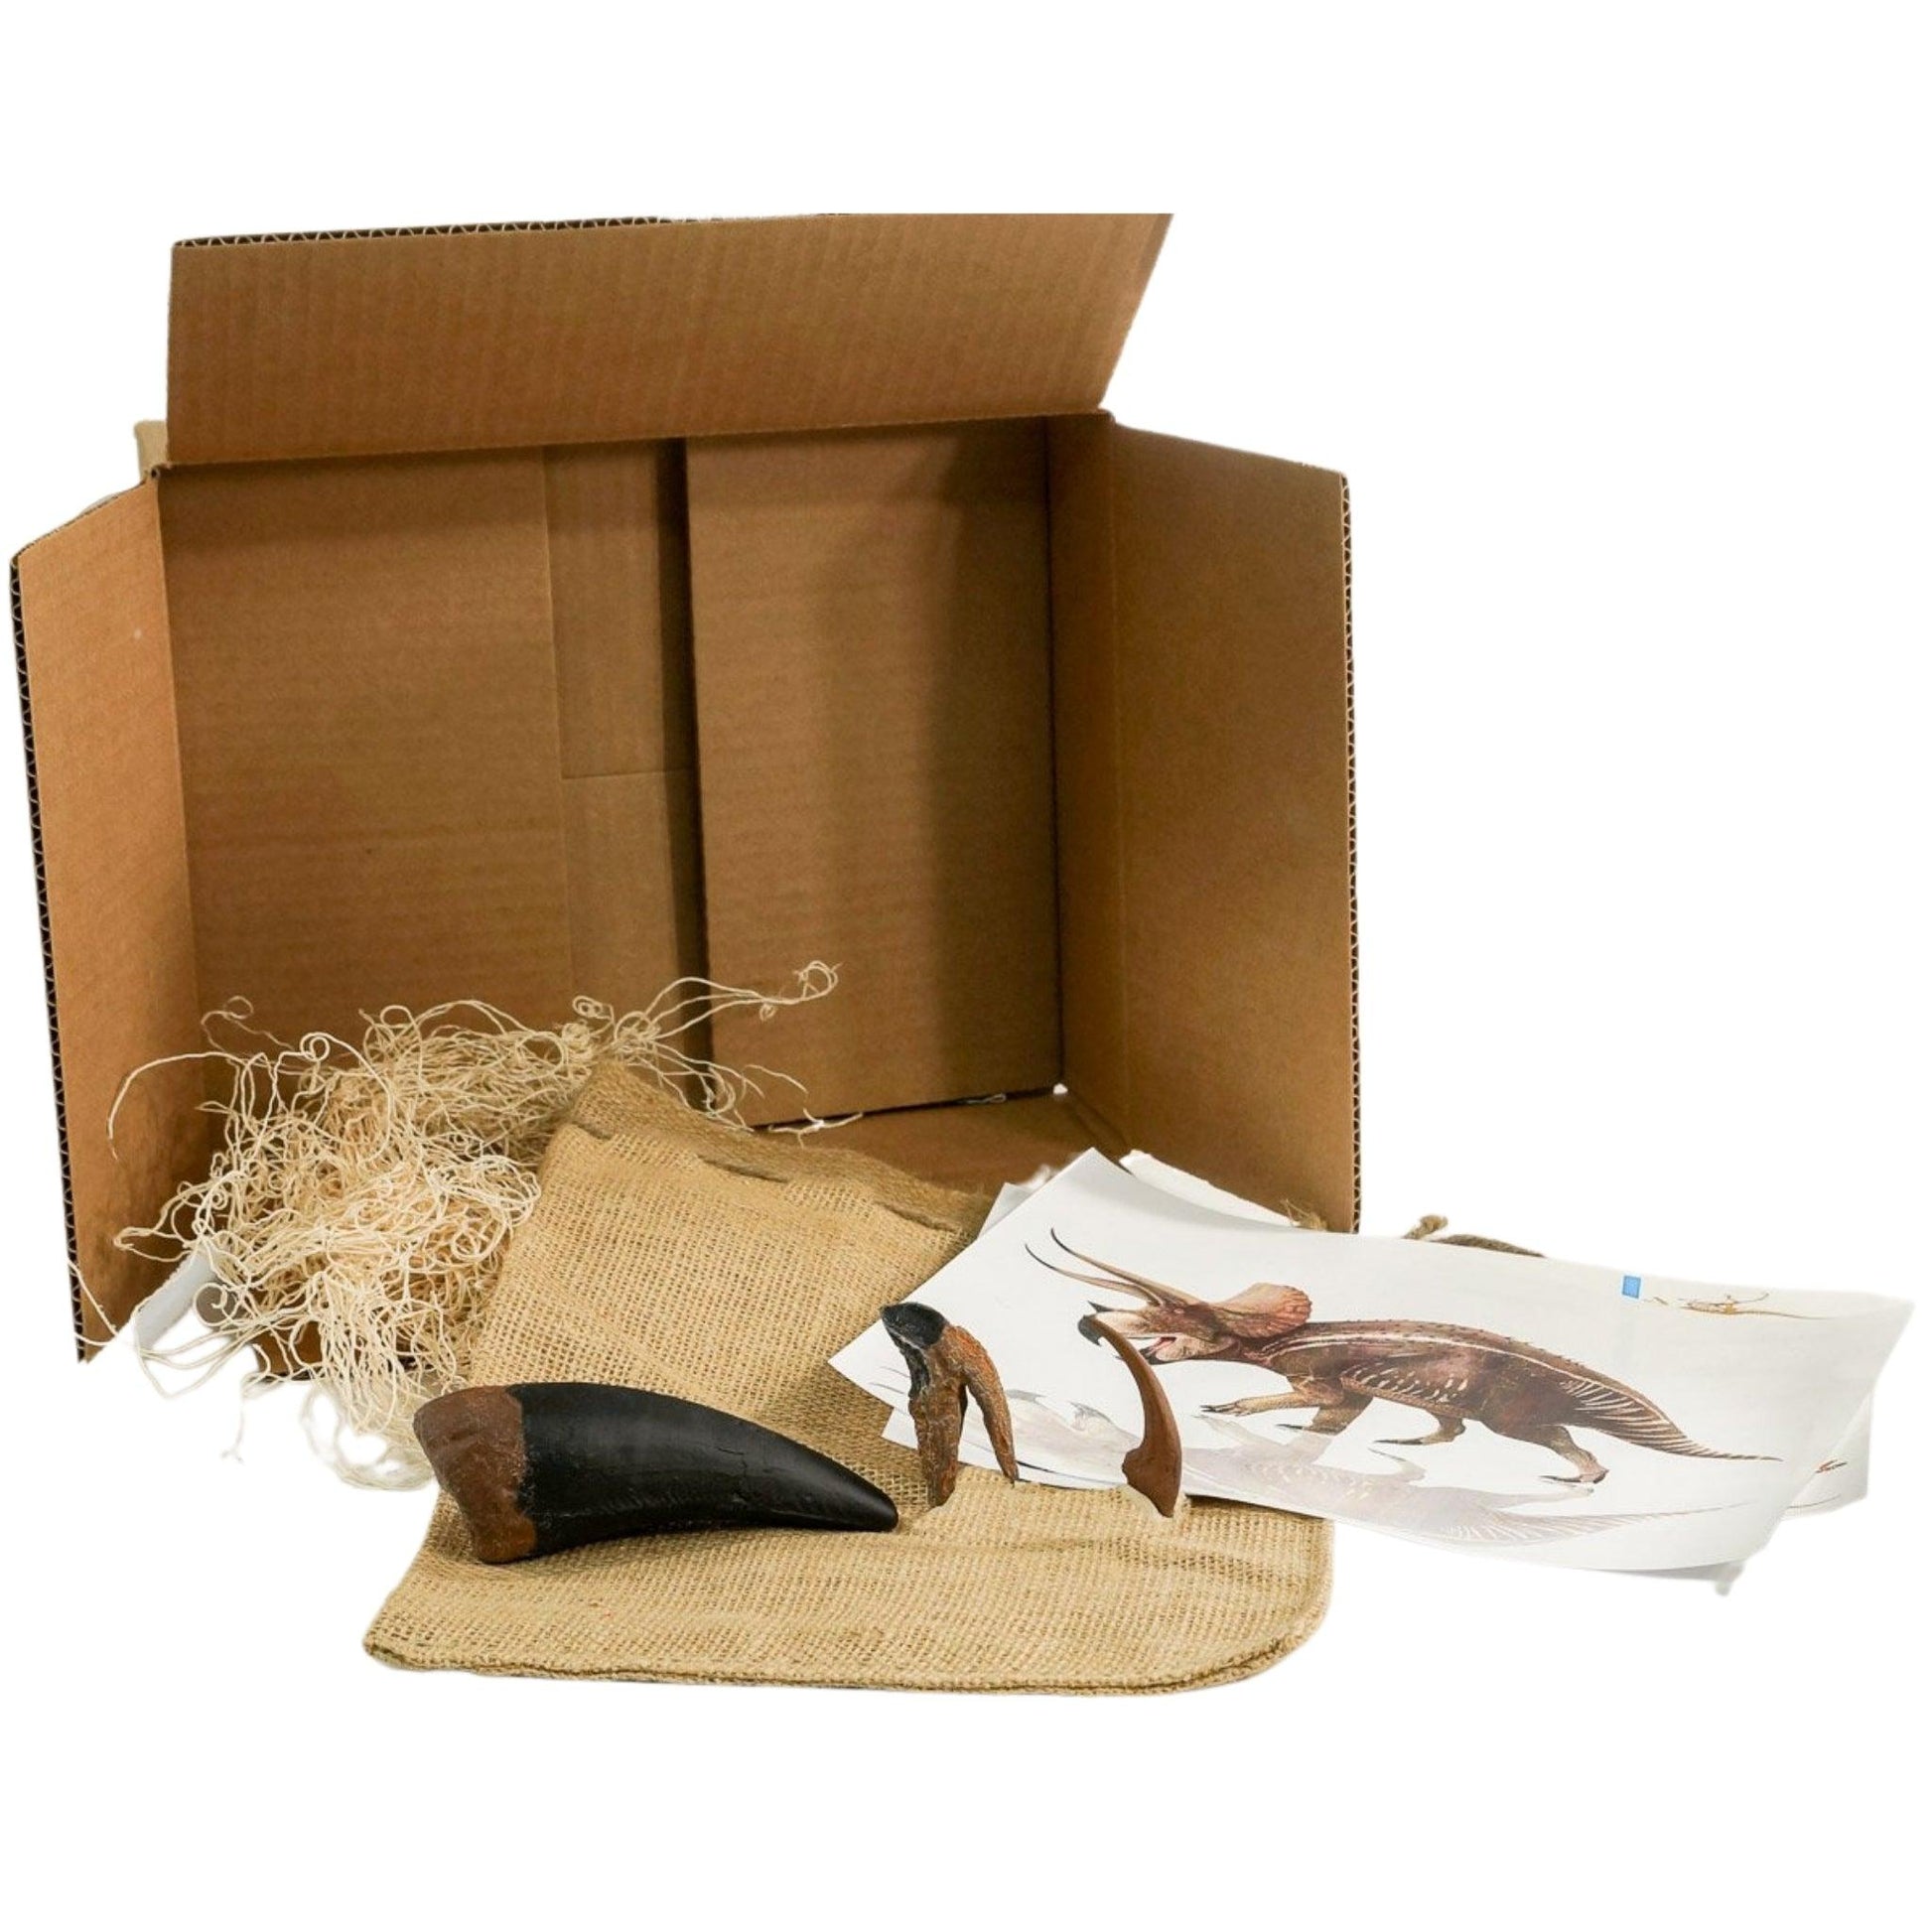 Classic Cretaceous Dinosaurs Crate - T. rex, Triceratops, Velociraptor - Fossil Crates Dinosaur teeth and claw casts